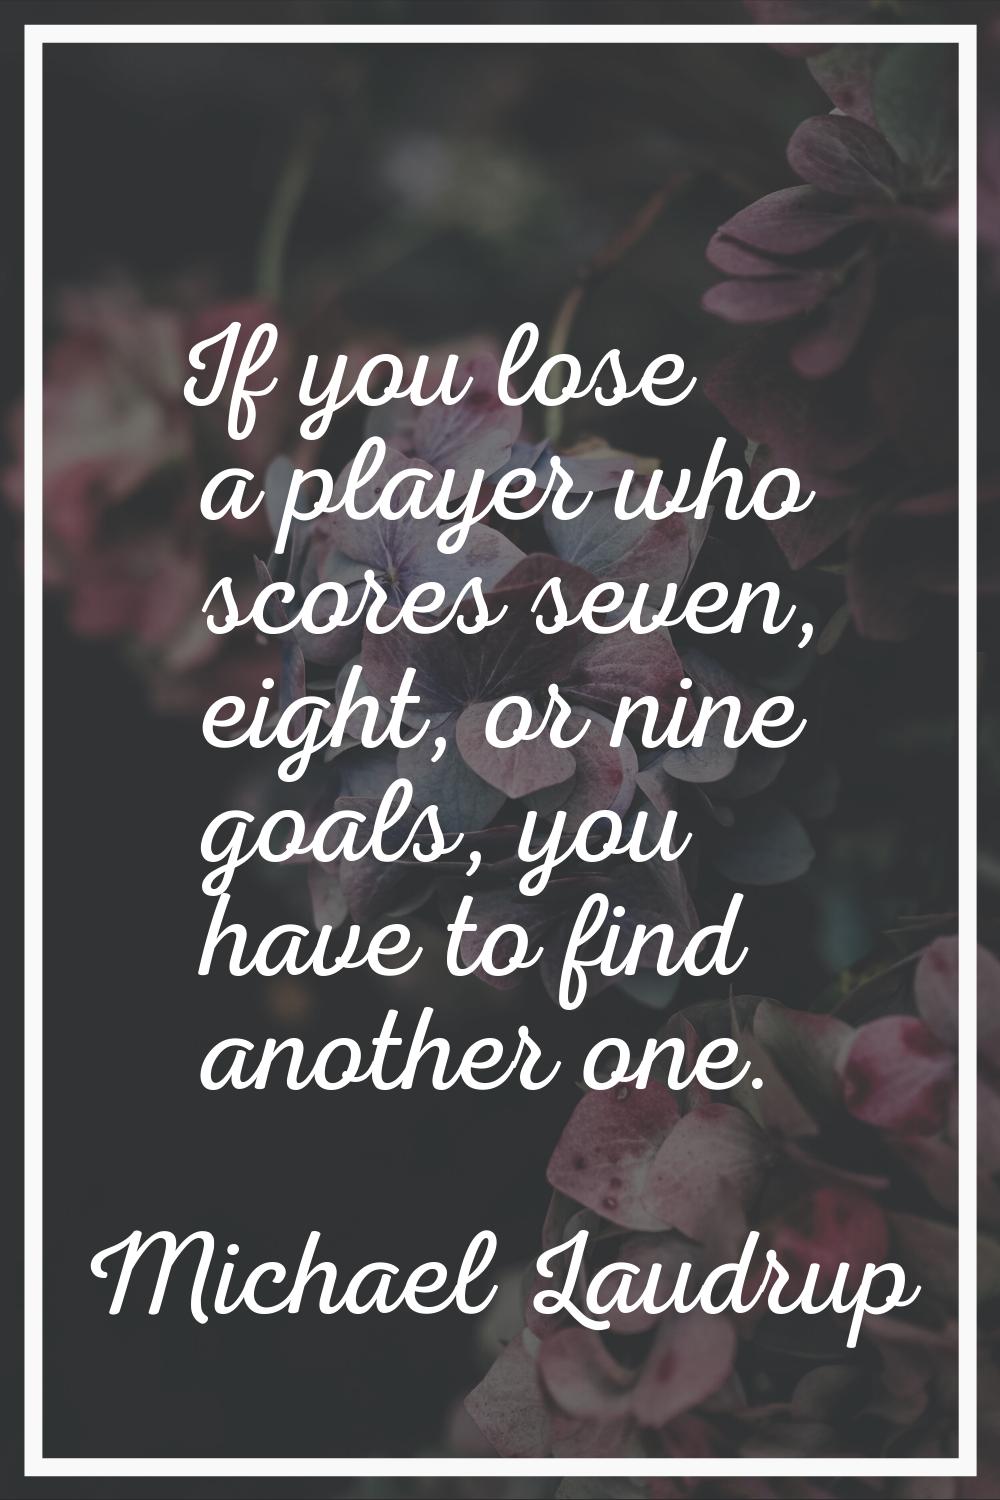 If you lose a player who scores seven, eight, or nine goals, you have to find another one.